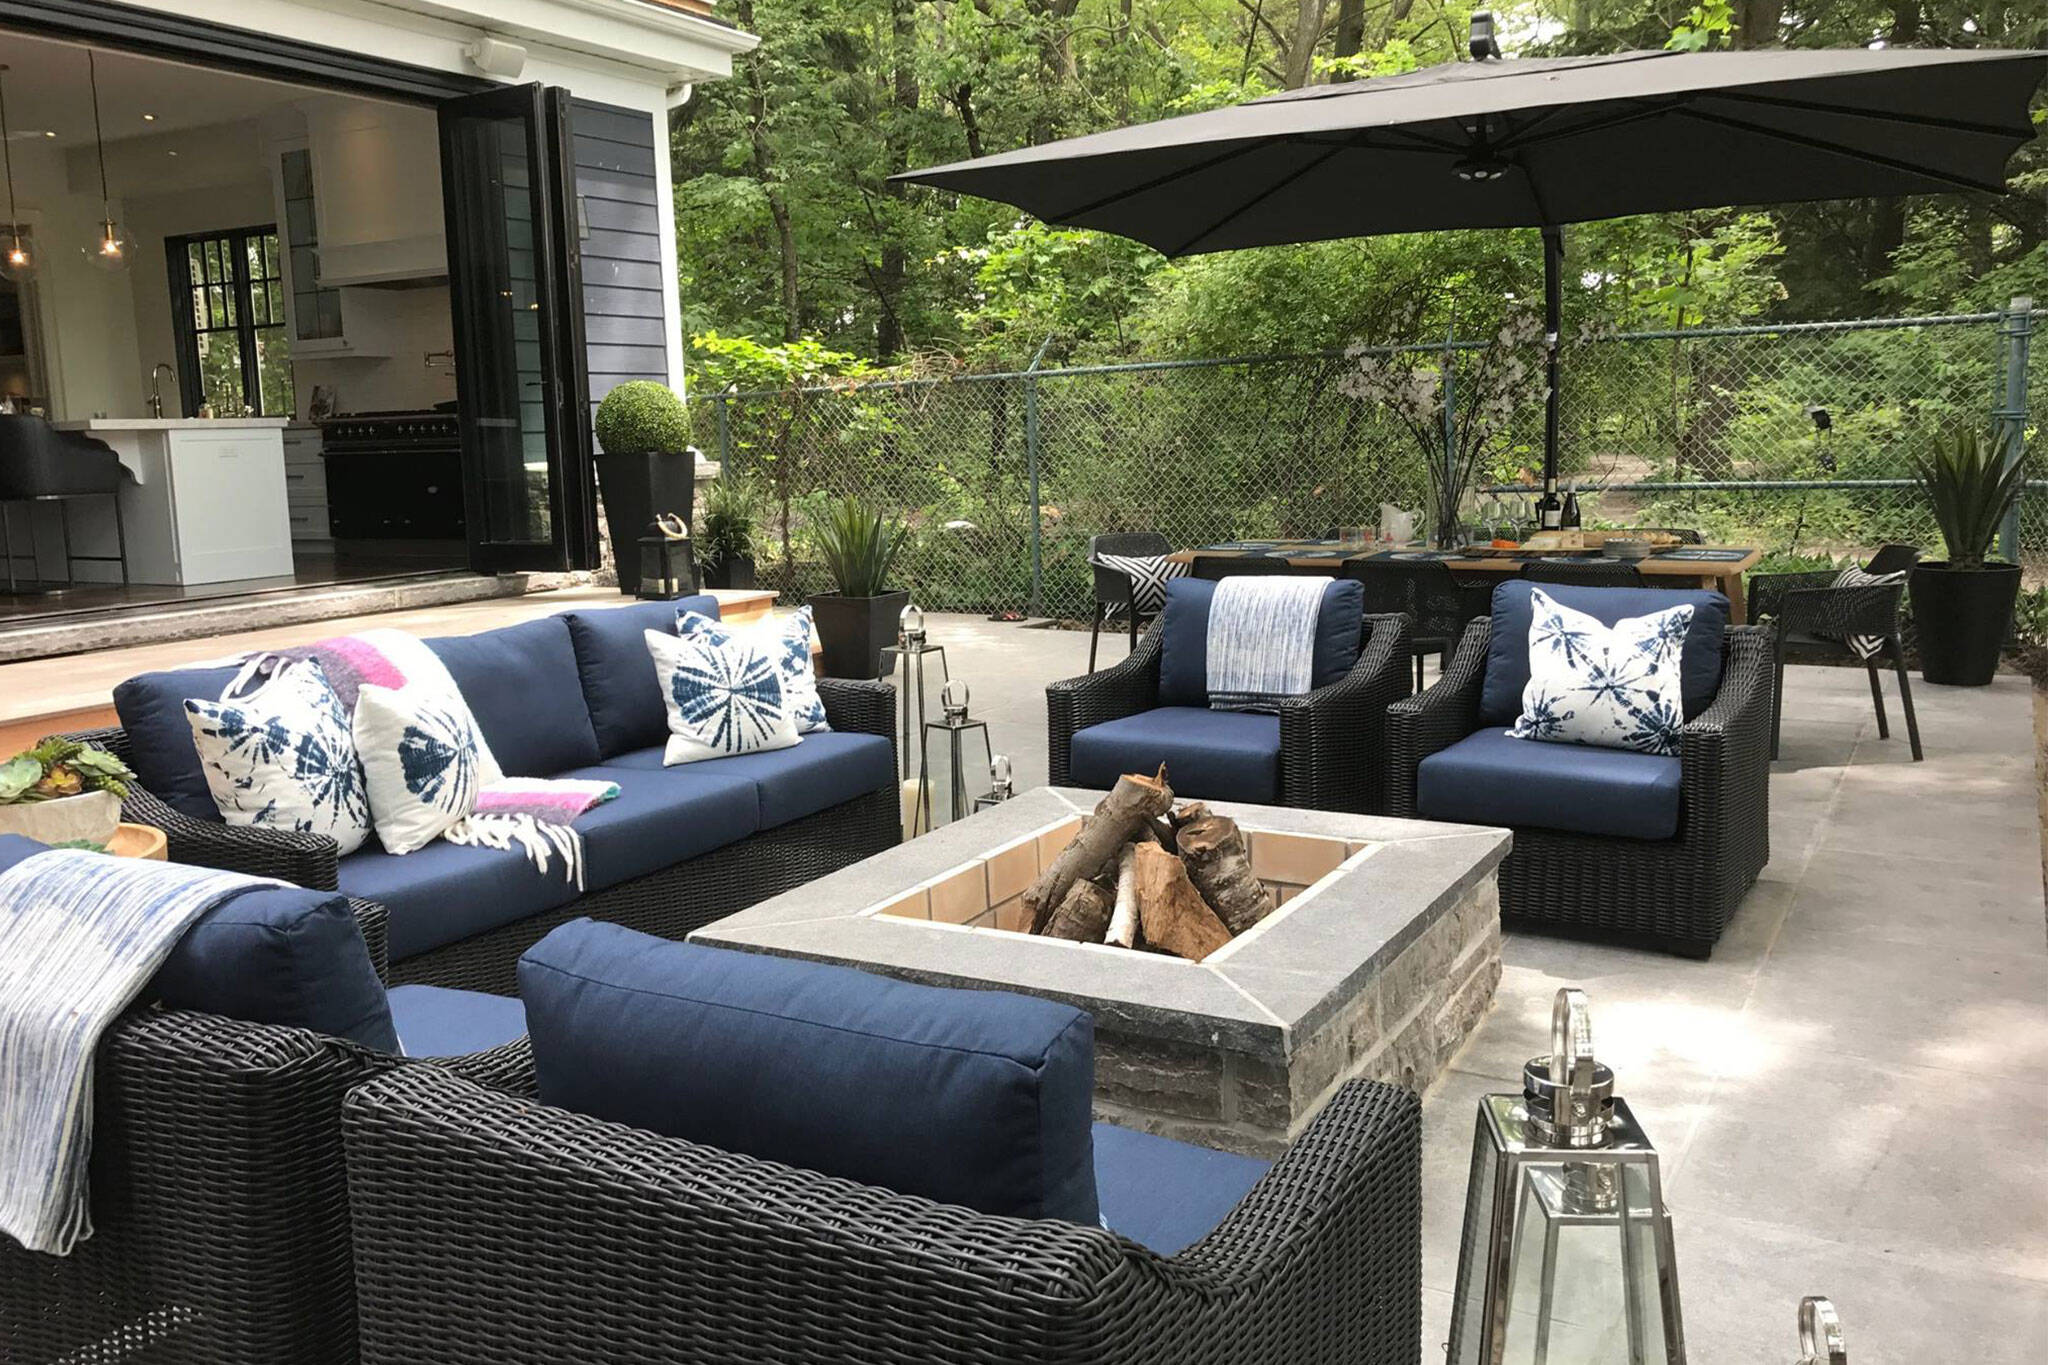 Outdoor Furniture Stores Near Me / Herndon Hot Tub Showroom Location